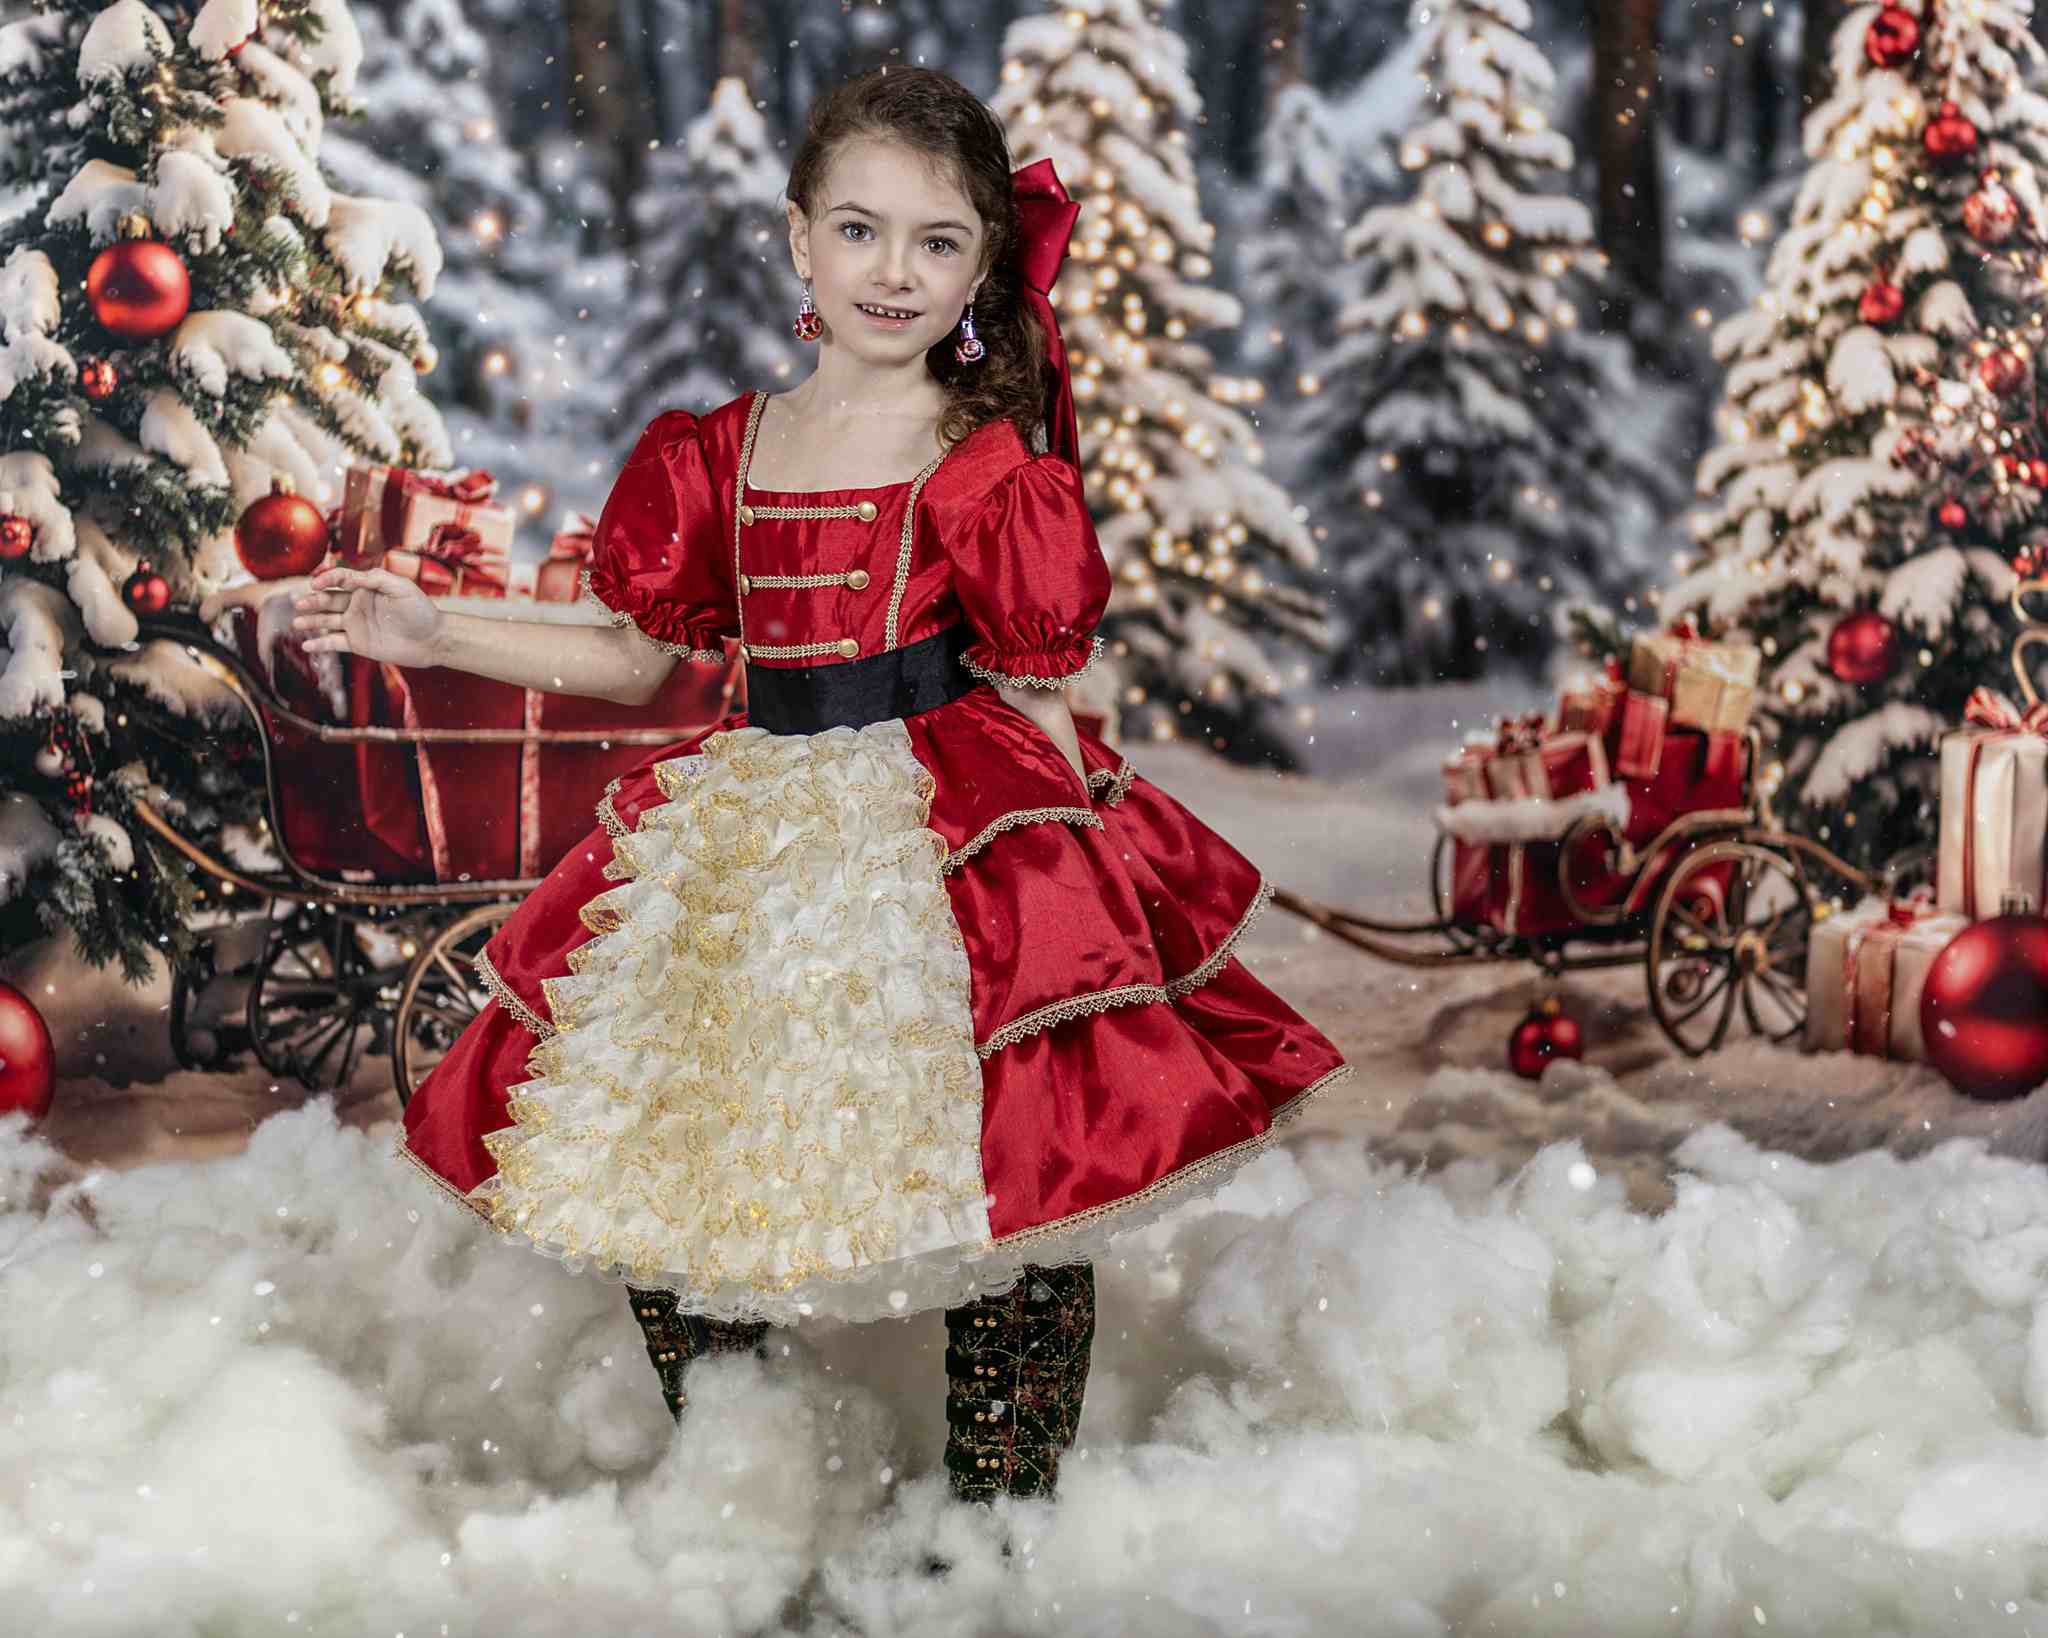 Kate Christmas Tree Outdoor Snowy Gift Backdrop for Photography